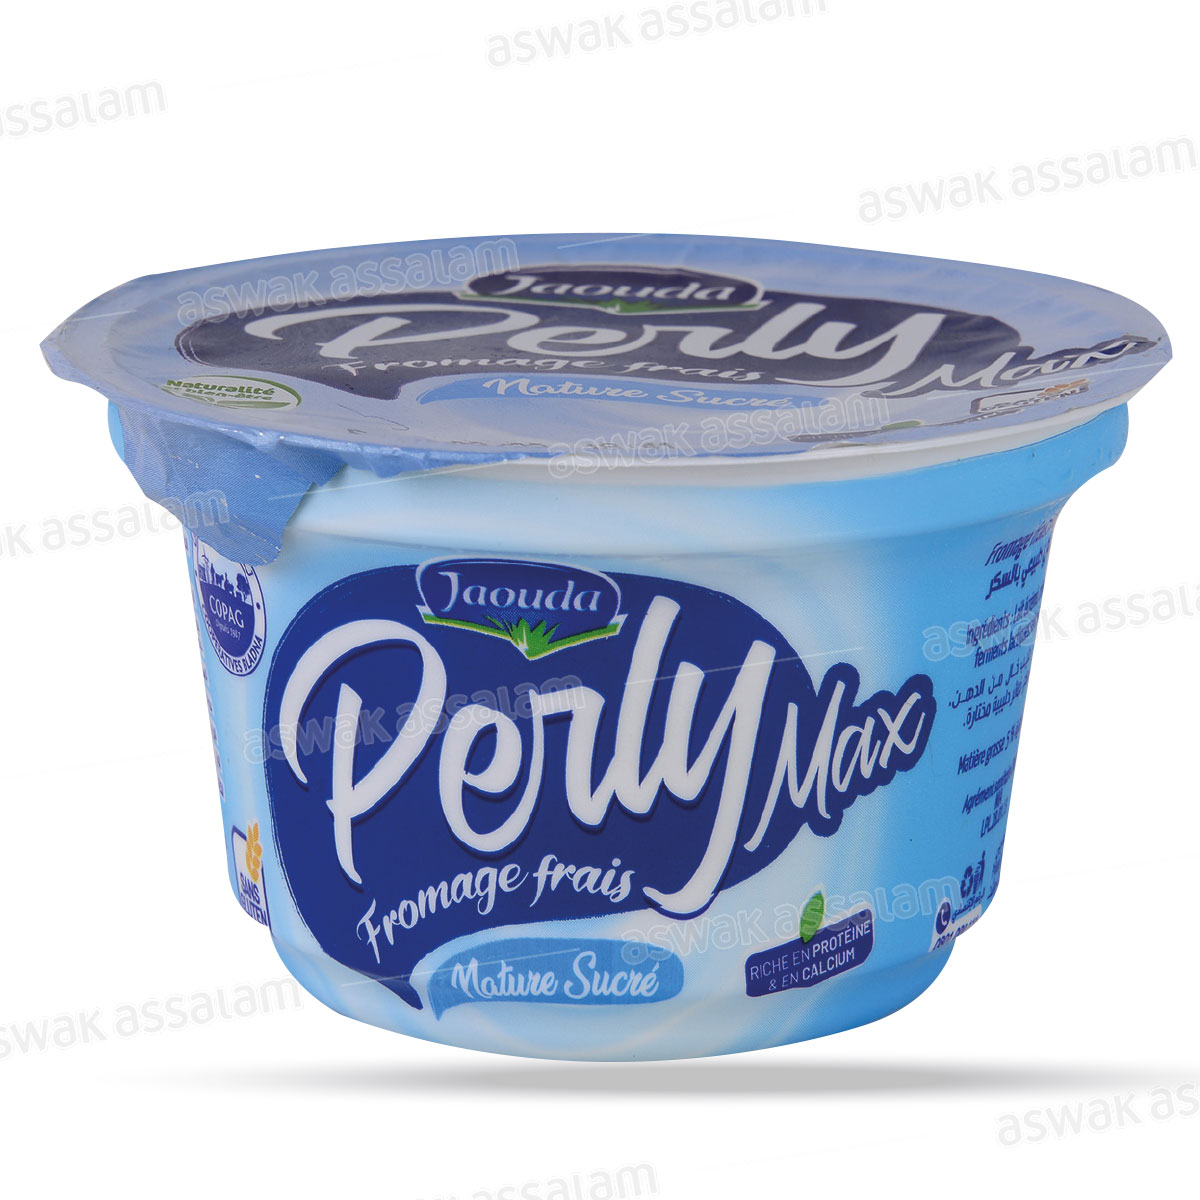 FROMAGE FRAIS NATURE SUCRE 160G PERLY MAX JAOUDA